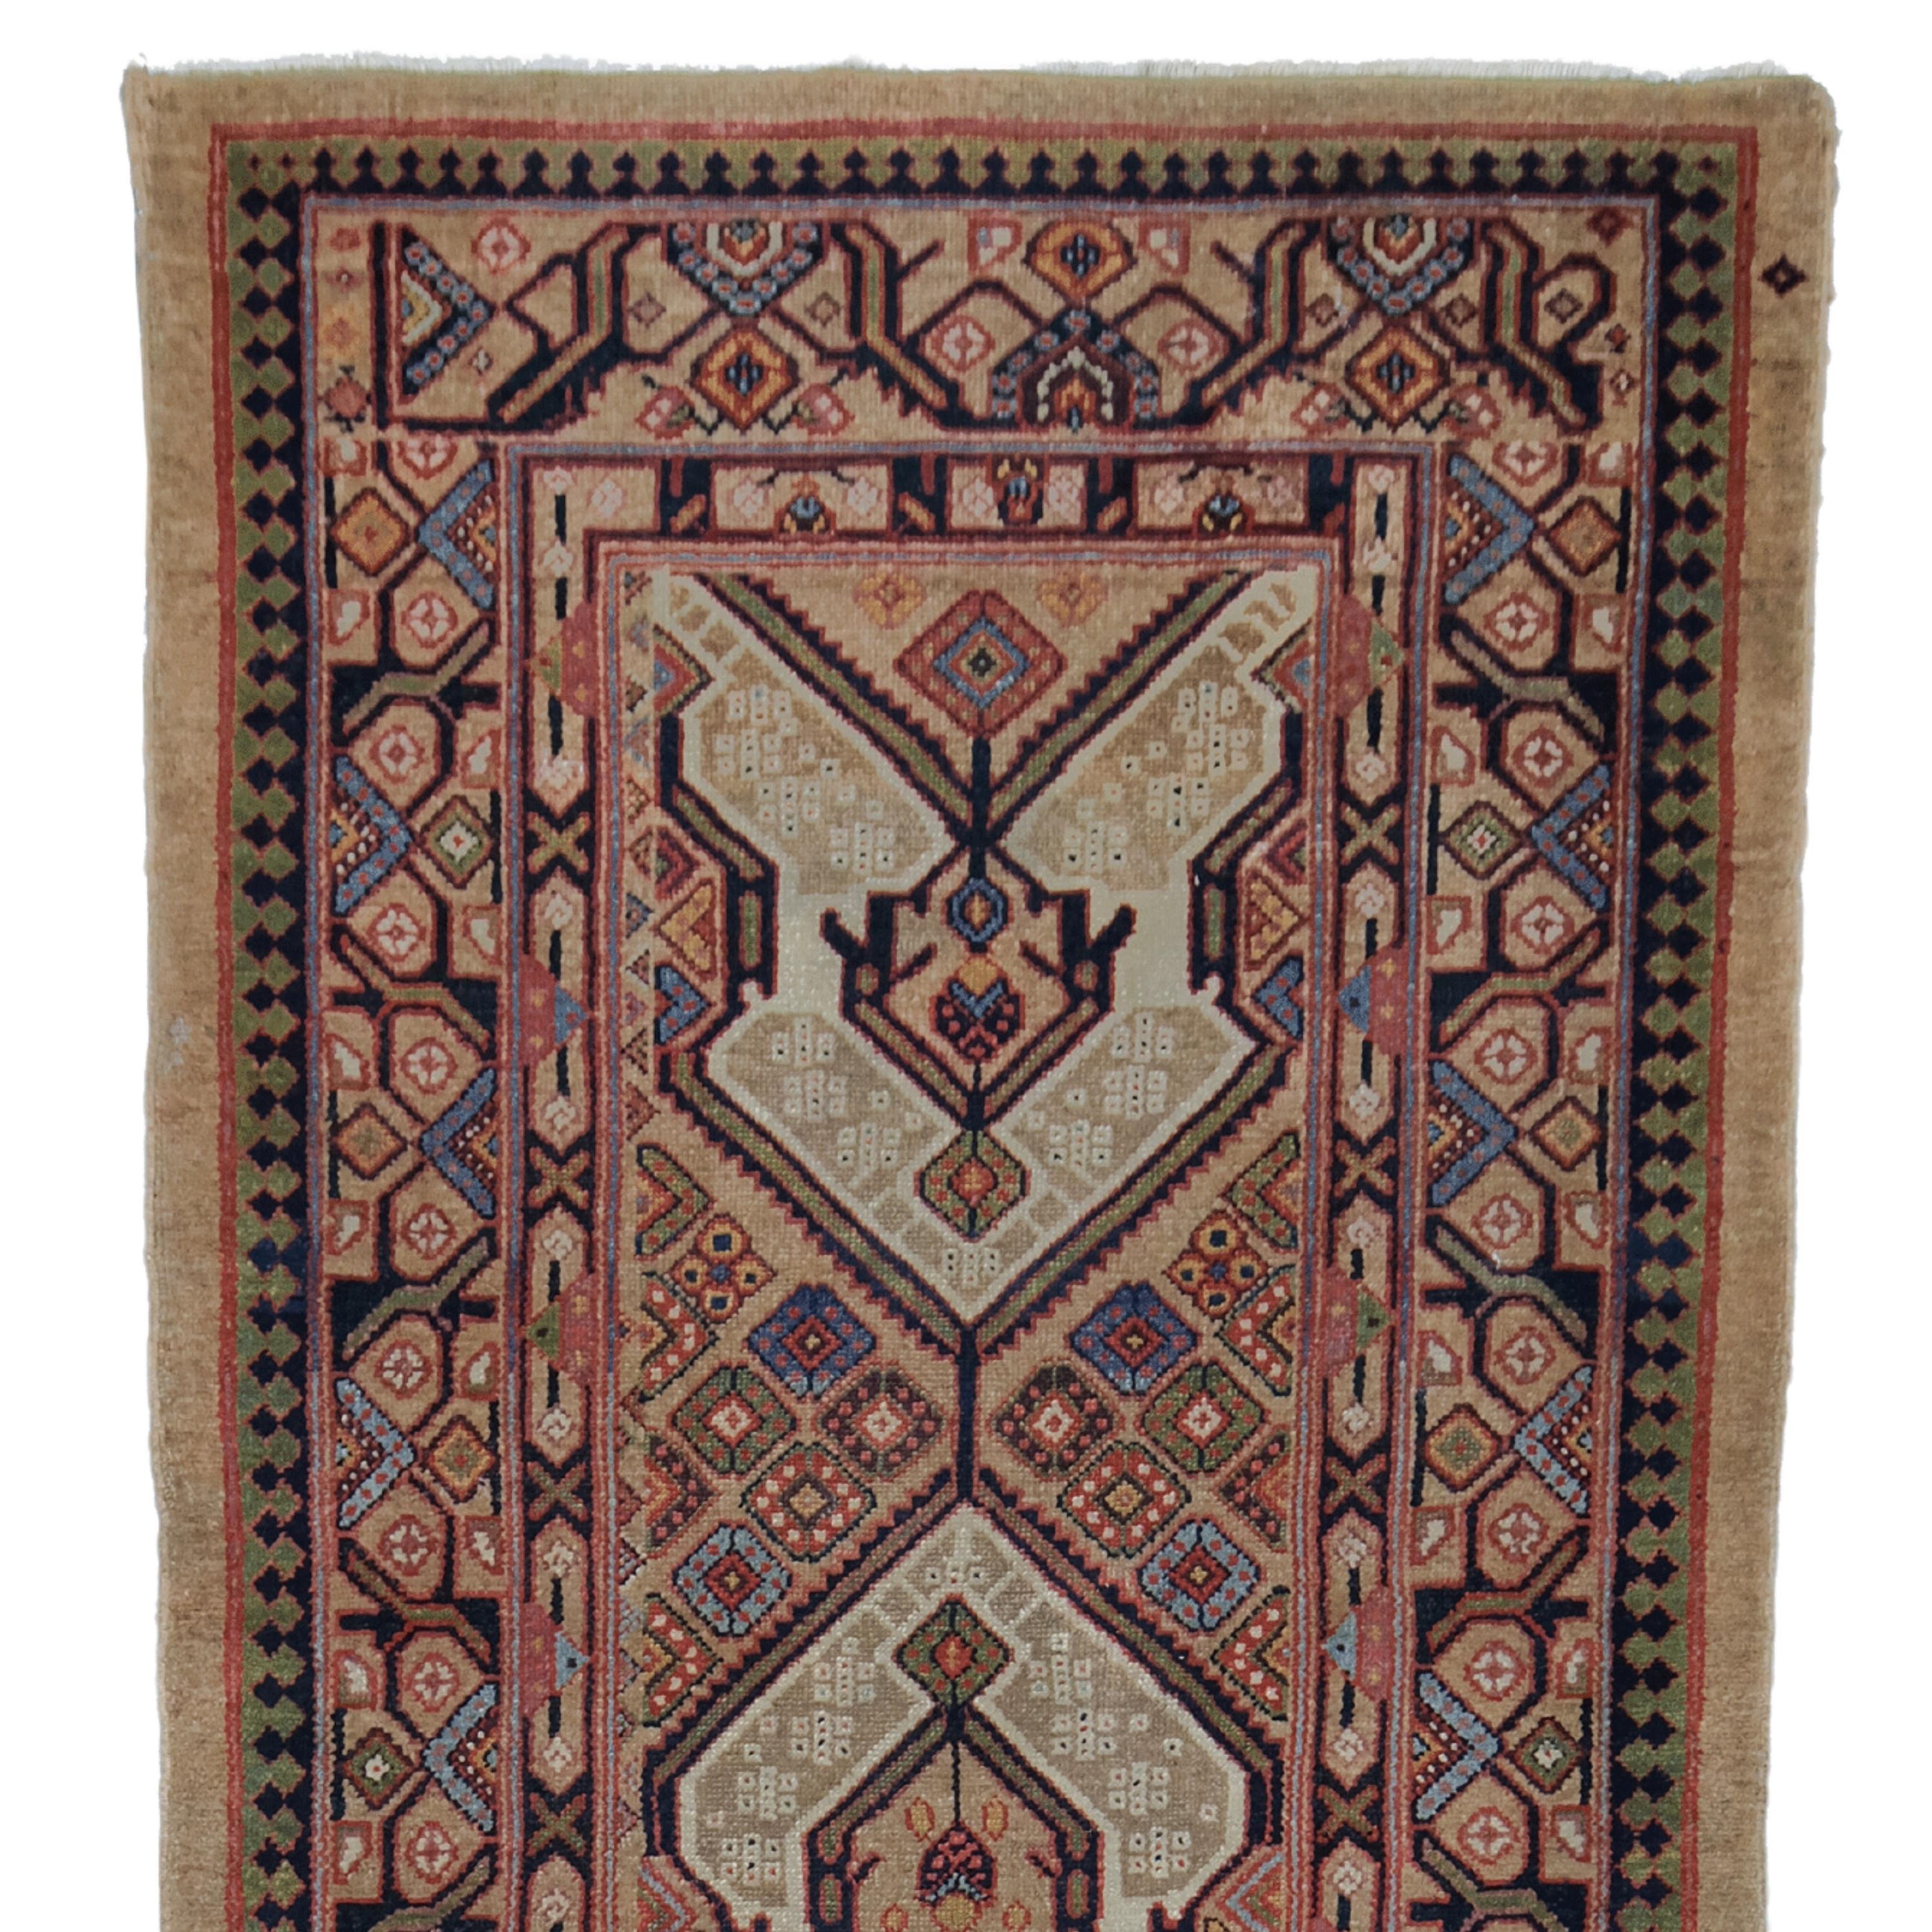 This wonderful runner will impress you with its intricate designs and vibrant colors that reflect the rich history and craftsmanship of the period. Each stitch tells the story of skilled craftsmen who masterfully crafted every detail. The earthy